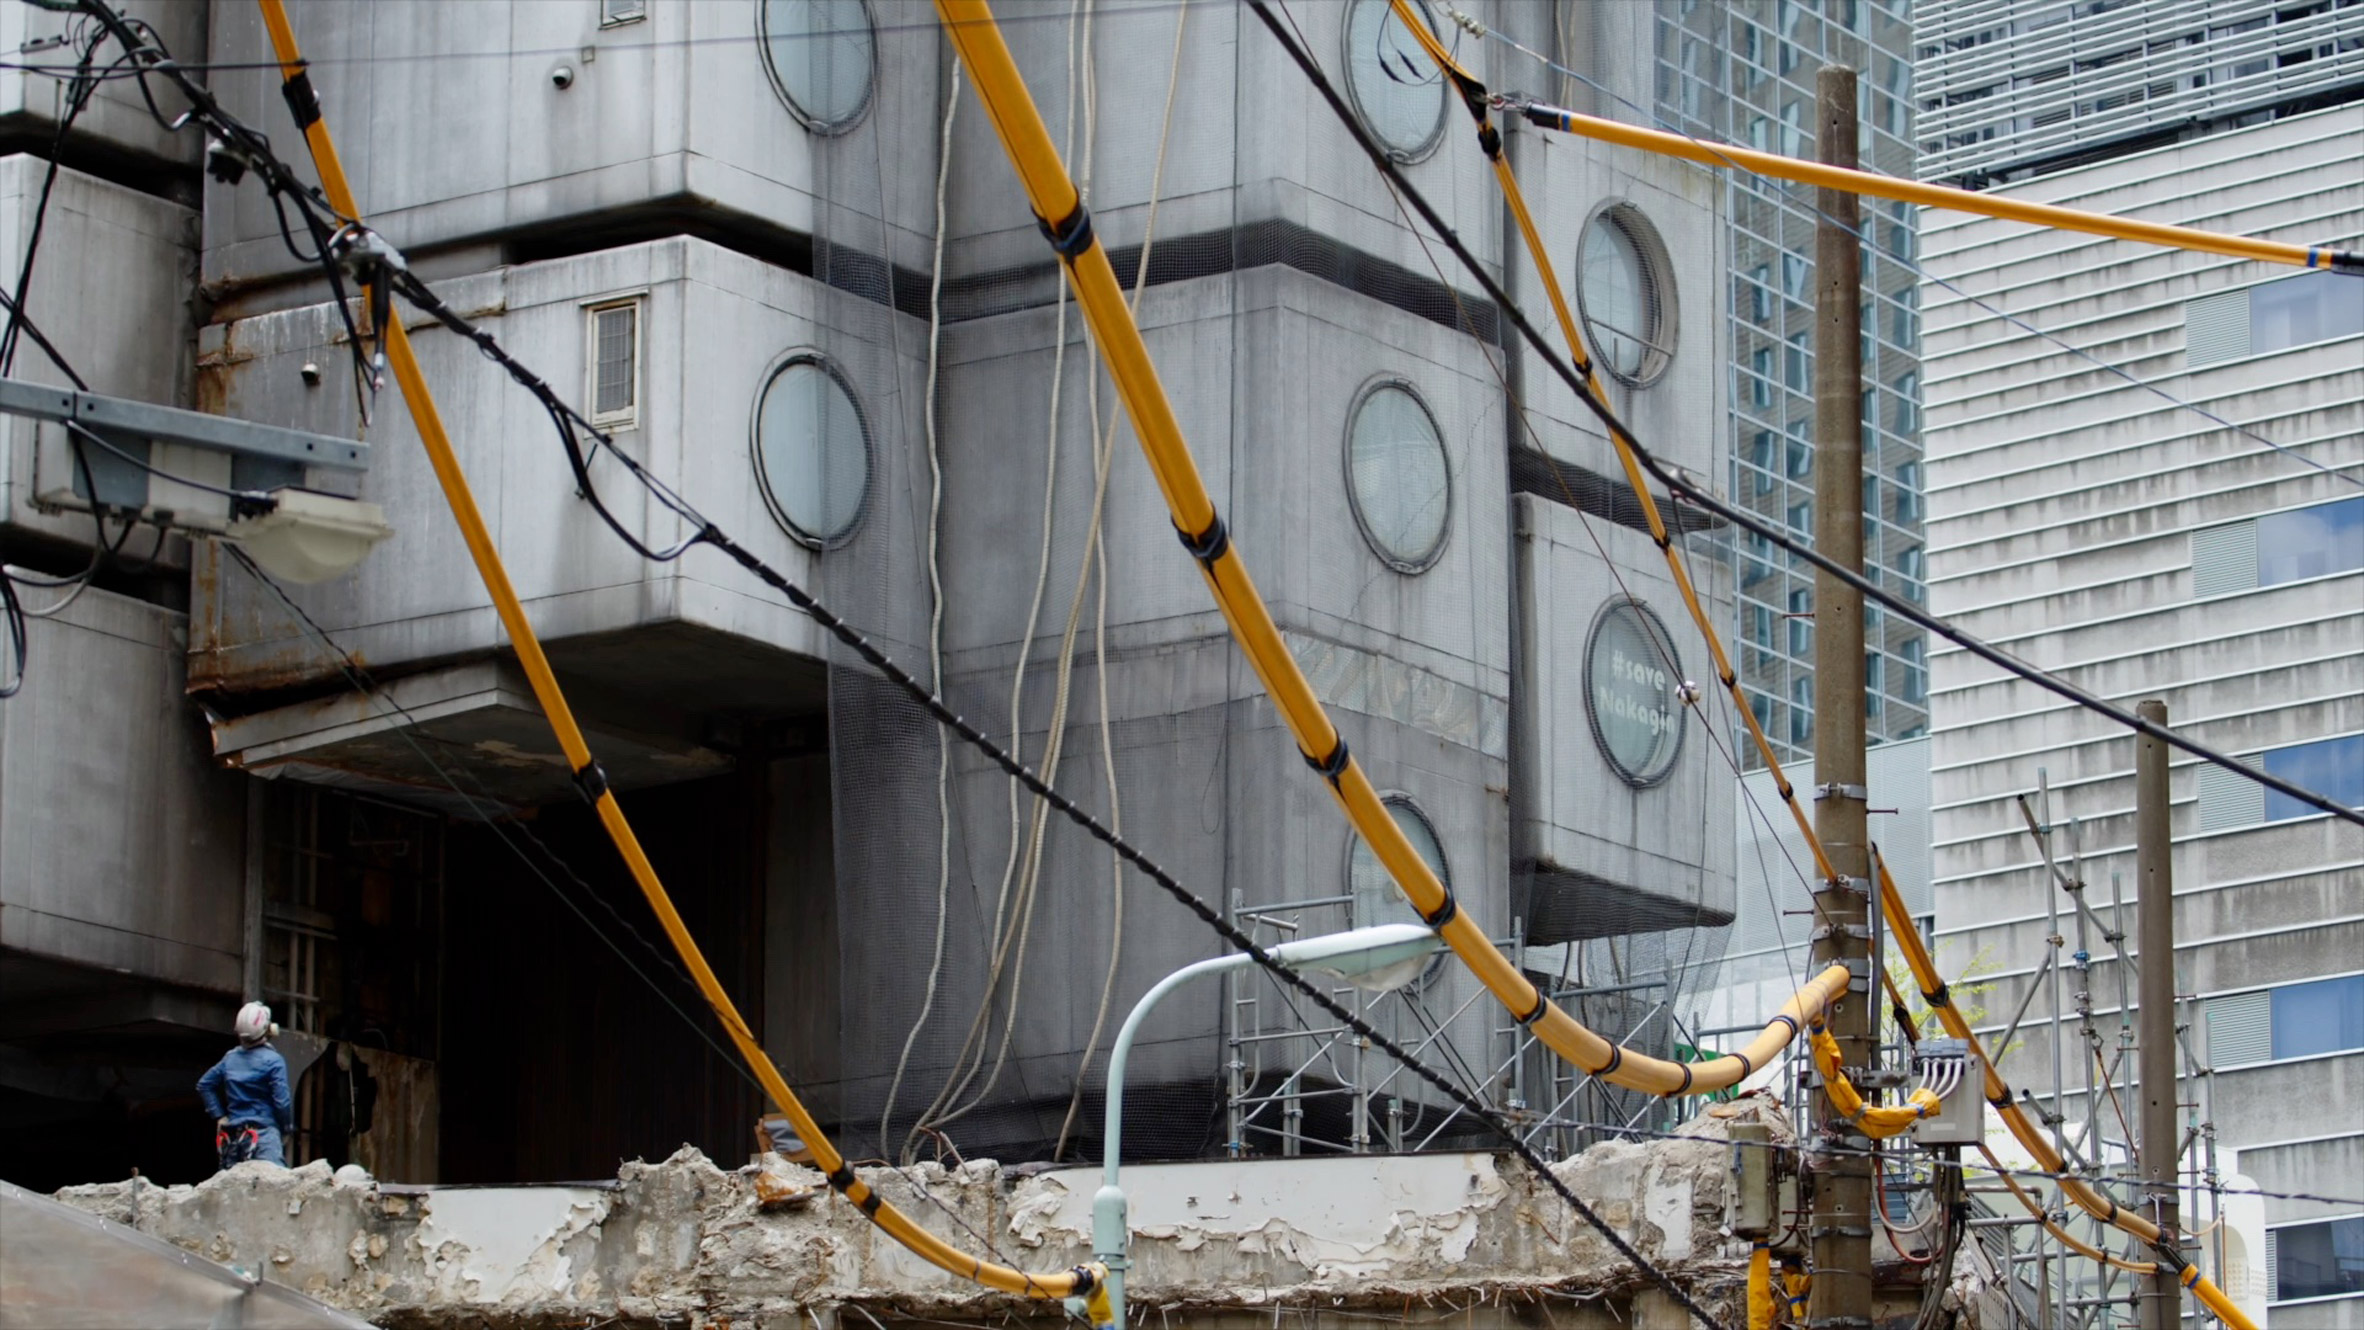 Image of the concrete structure being revealed at the Nakagin Capsule Tower